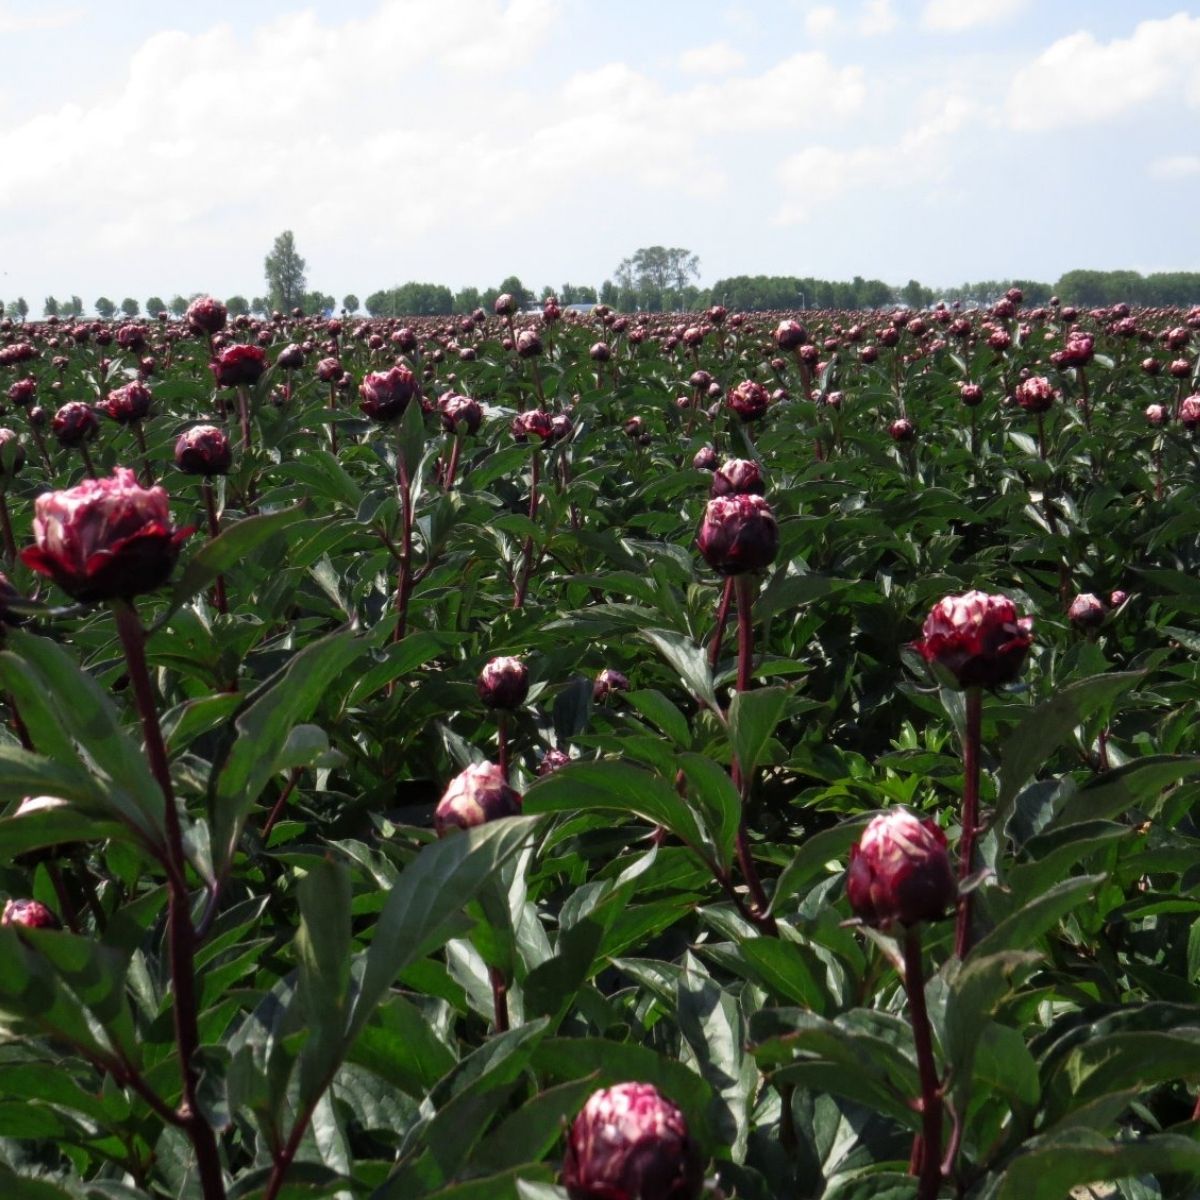 Peonies in the field -My Peony Society about Covid-19